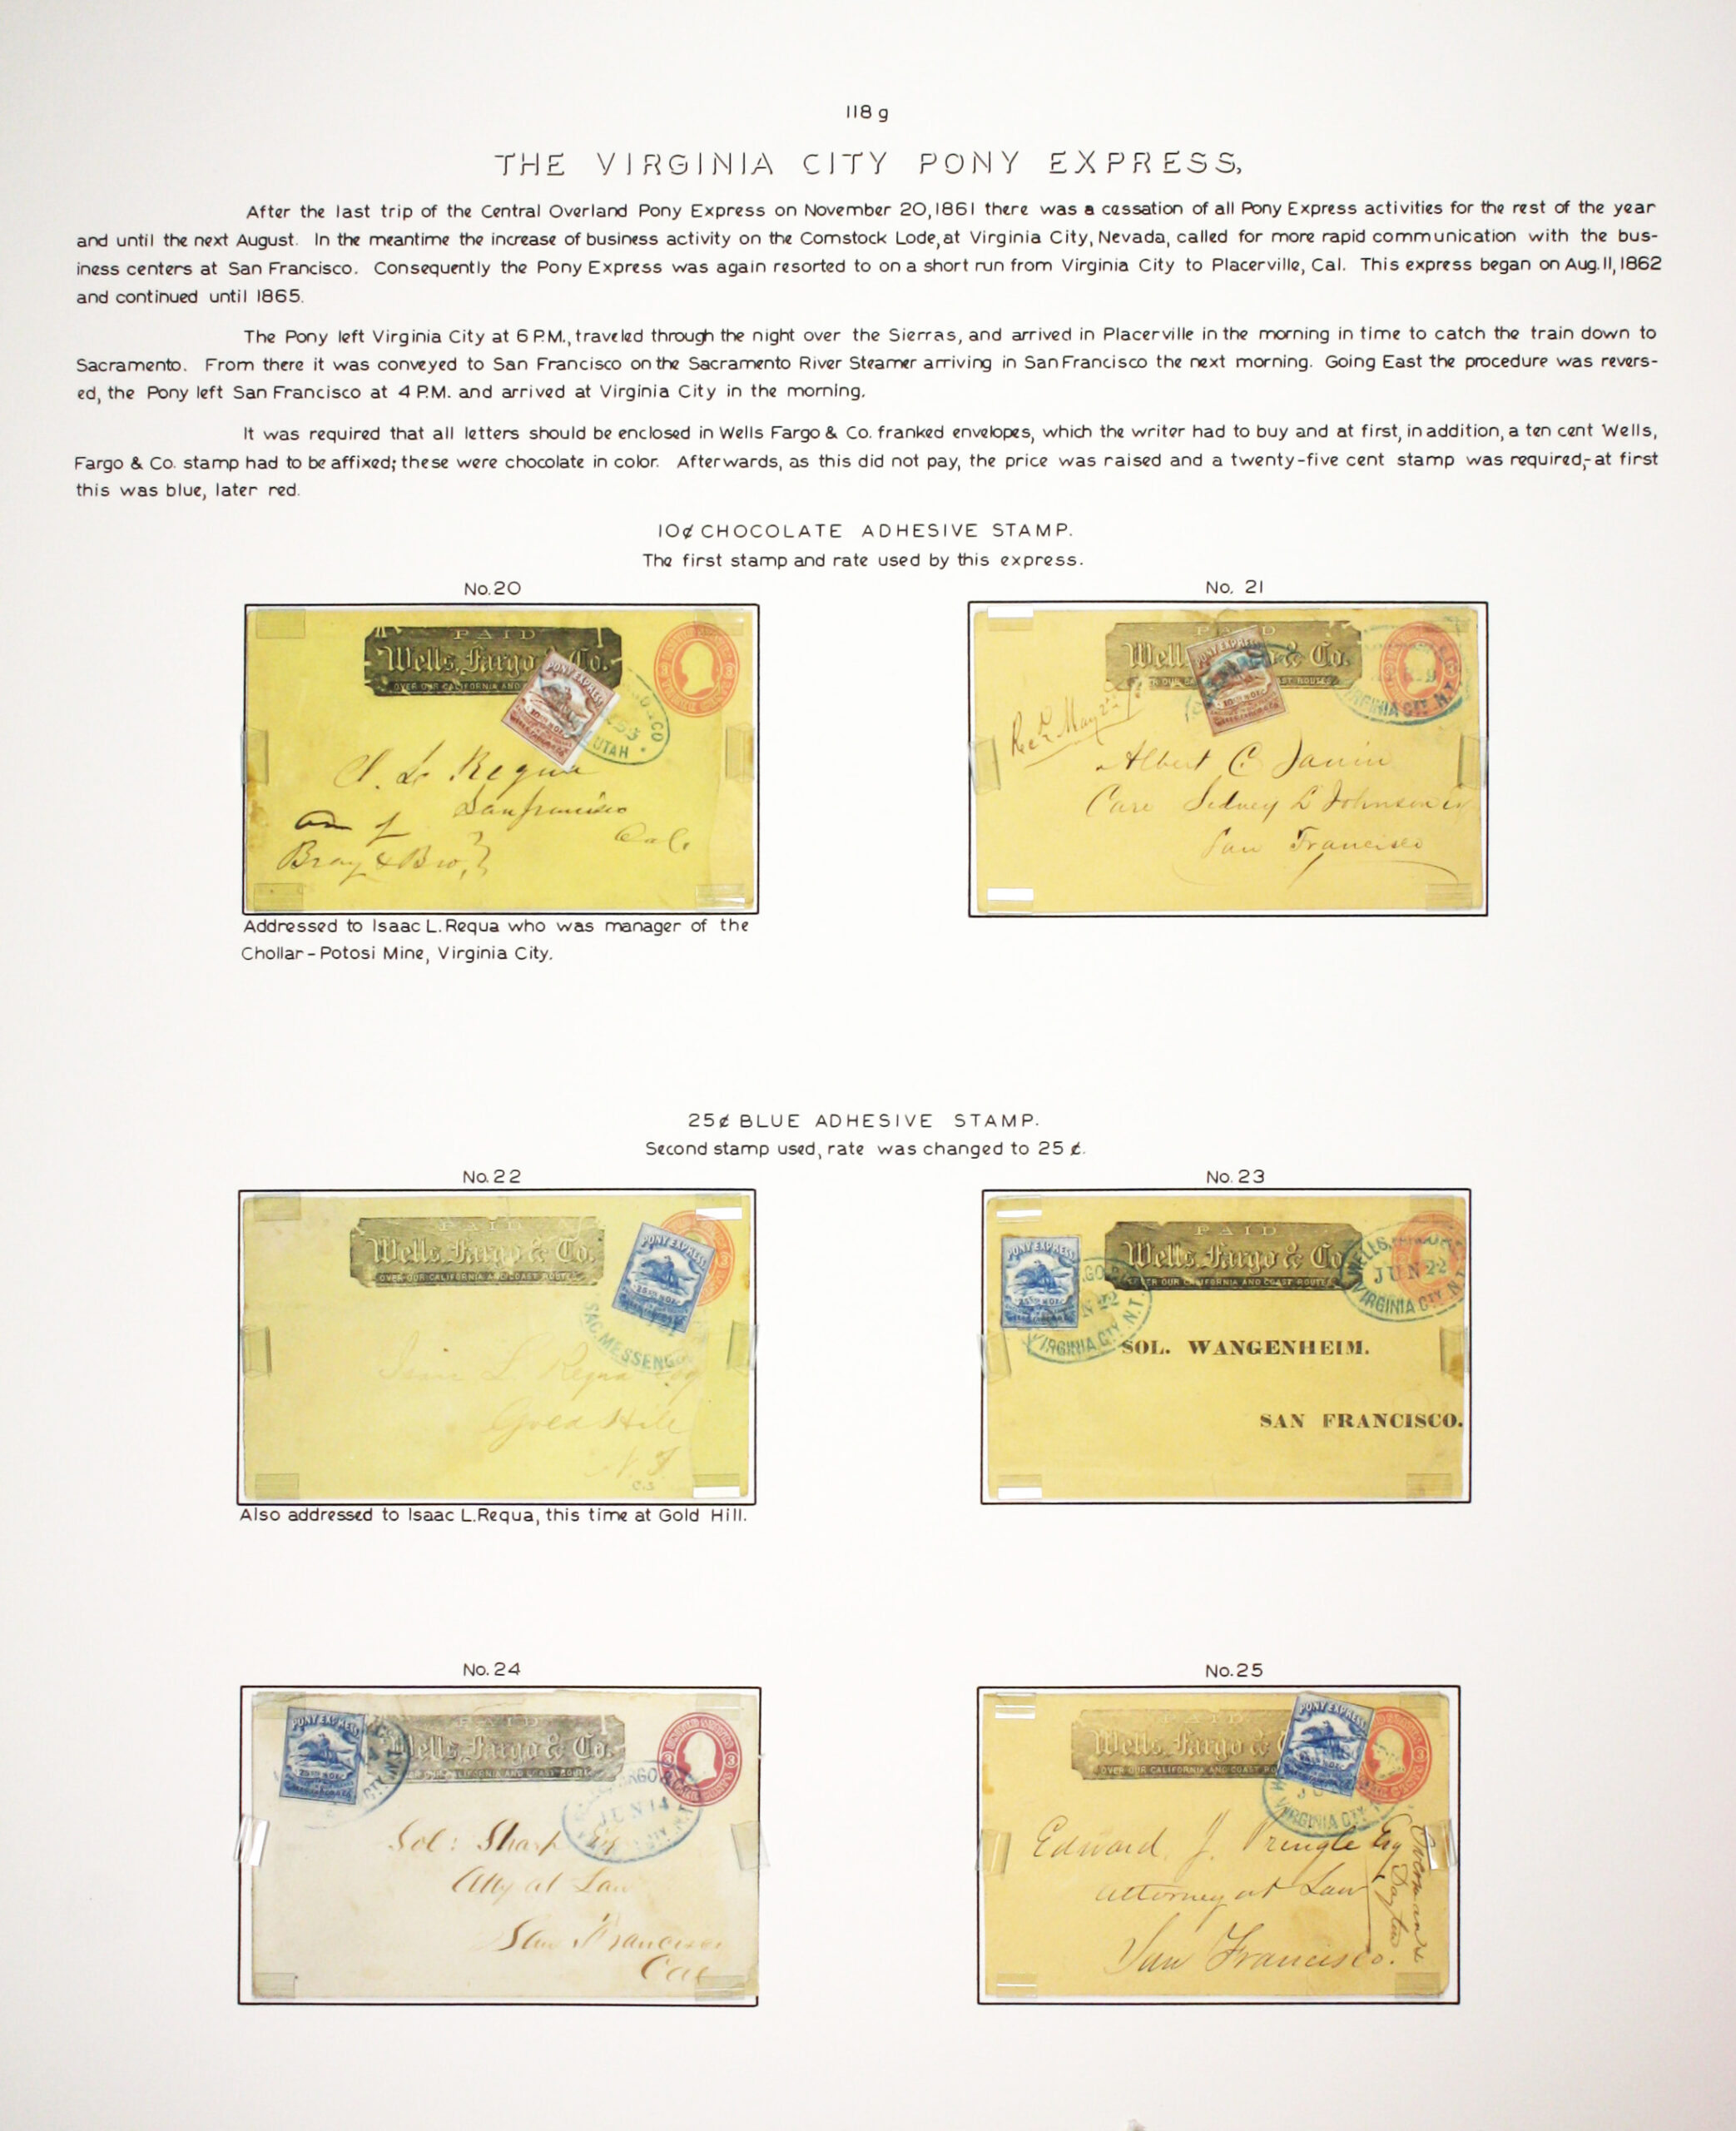 Historic exhibit Panel #118g featuring letter covers. Long descriptions are available as page content. Image link will enlarge image.